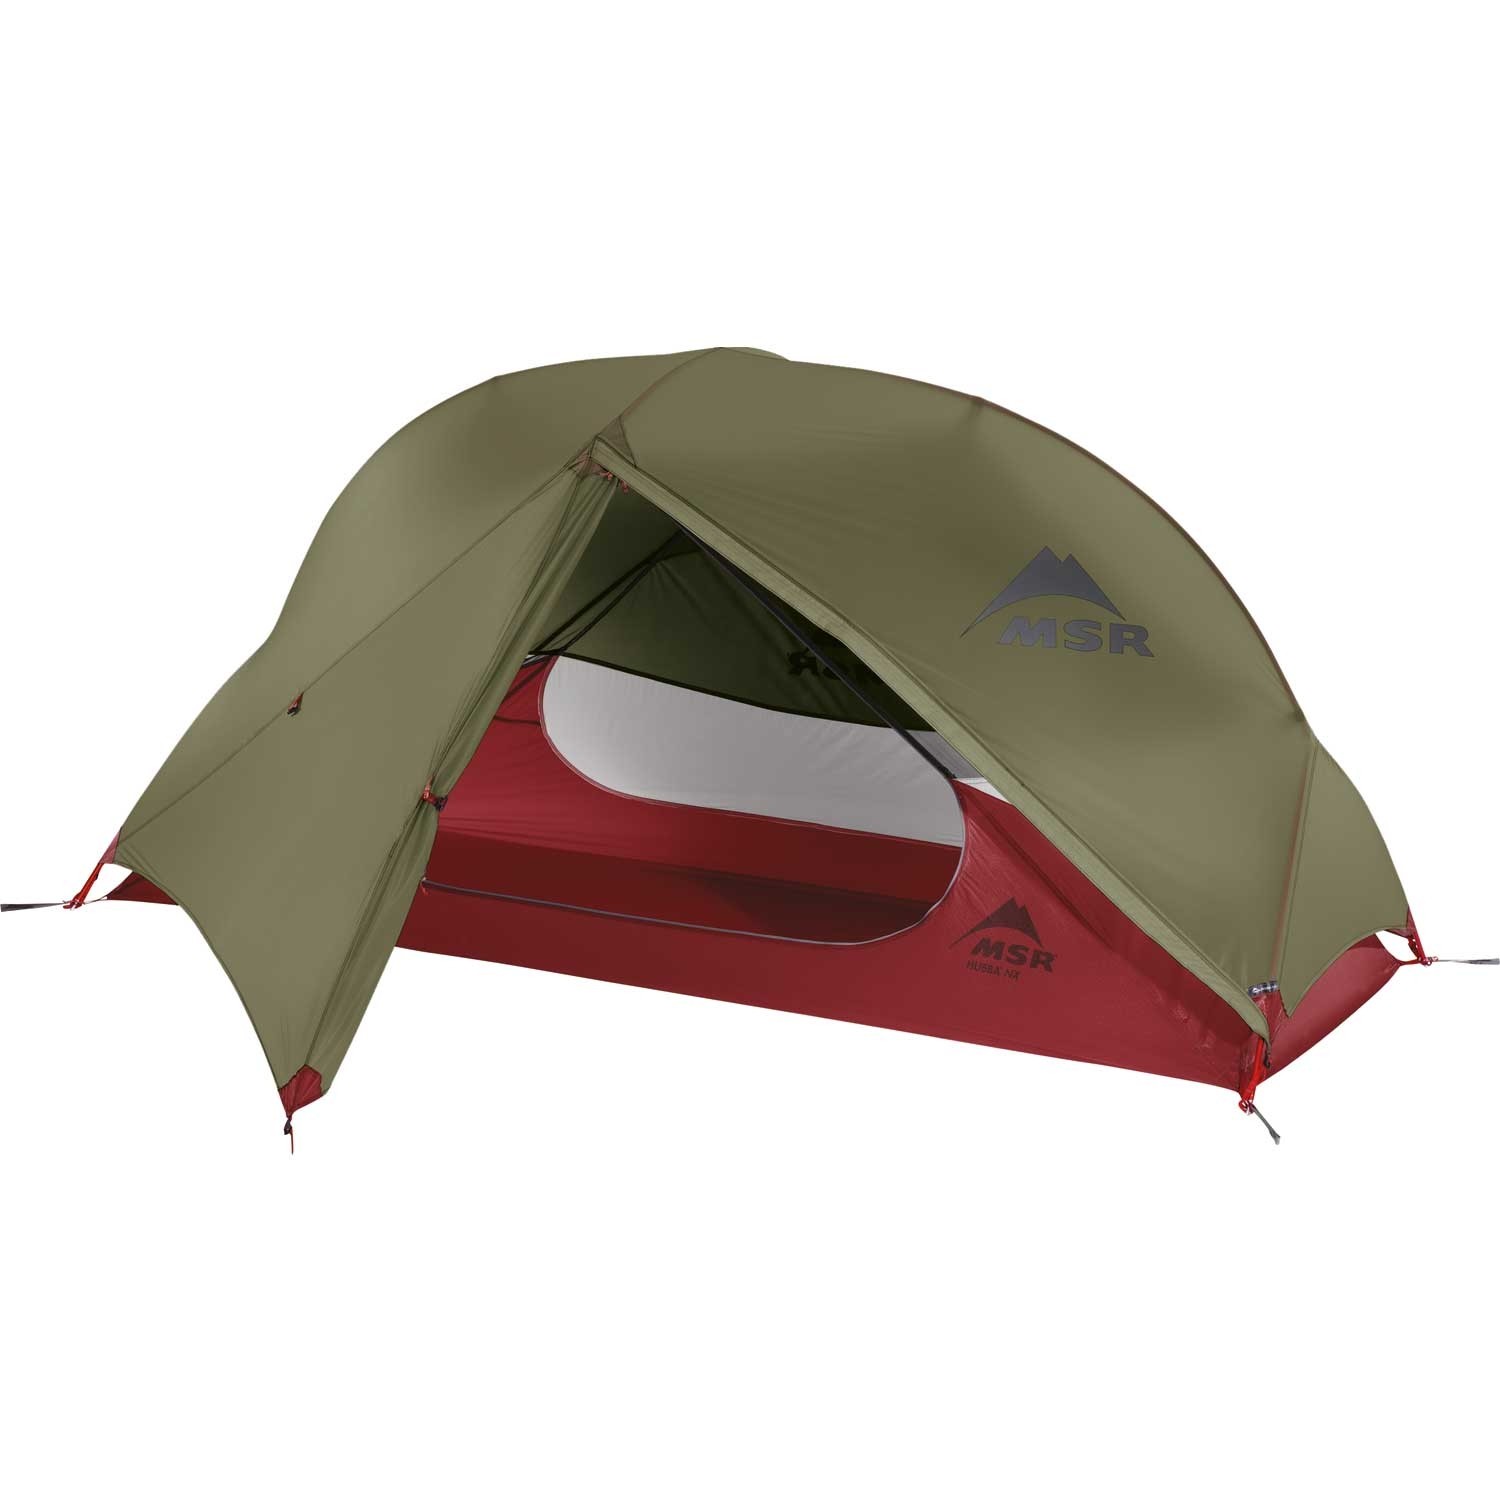 MSR Hubba NX Solo Backpacking Tent - Green